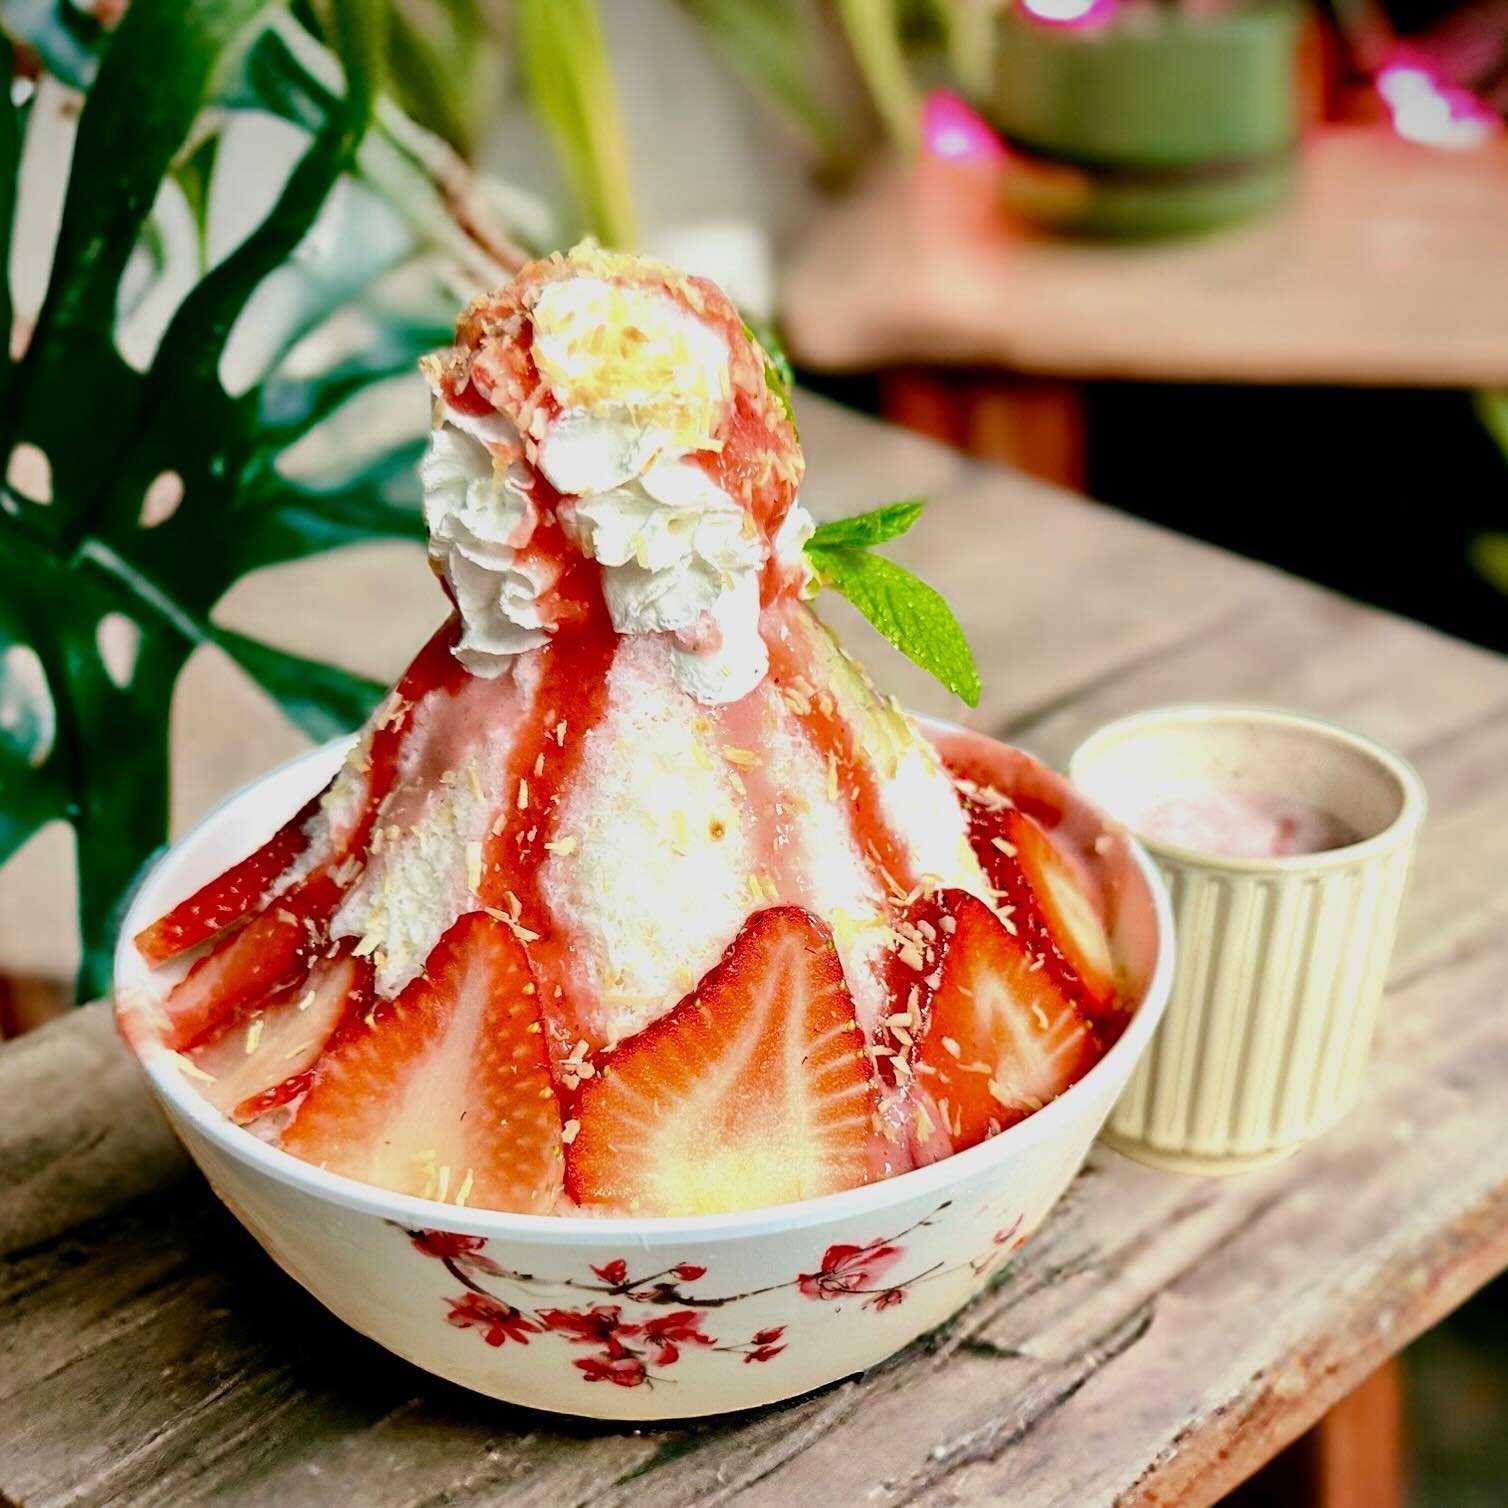 Save your room! There&rsquo;s a new dessert in town!. 
ThaiPop Shaved Milk Ice (AKA #bingsu  #빙수 #น้ำแข็งไส  #namkengsai ) 

Our current featured flavor is Strawberry&rsquo;s n&rsquo; Cream (GF) Shaved Milk (as fine as snow!), sweetened condensed mil